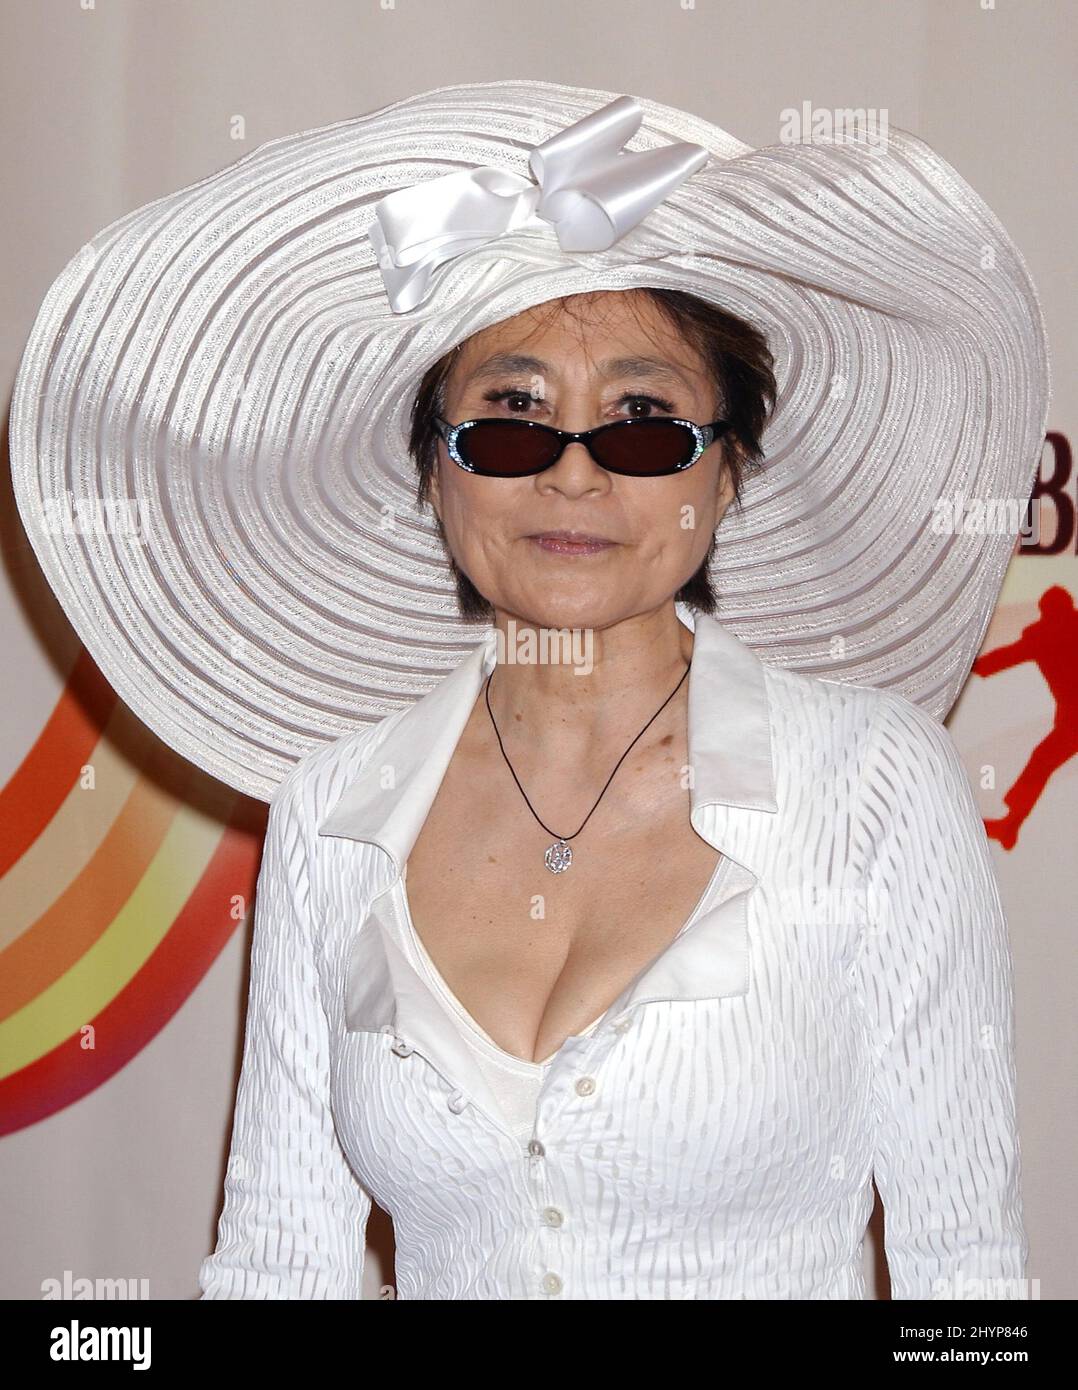 Yoko ono hi-res stock photography and images picture pic